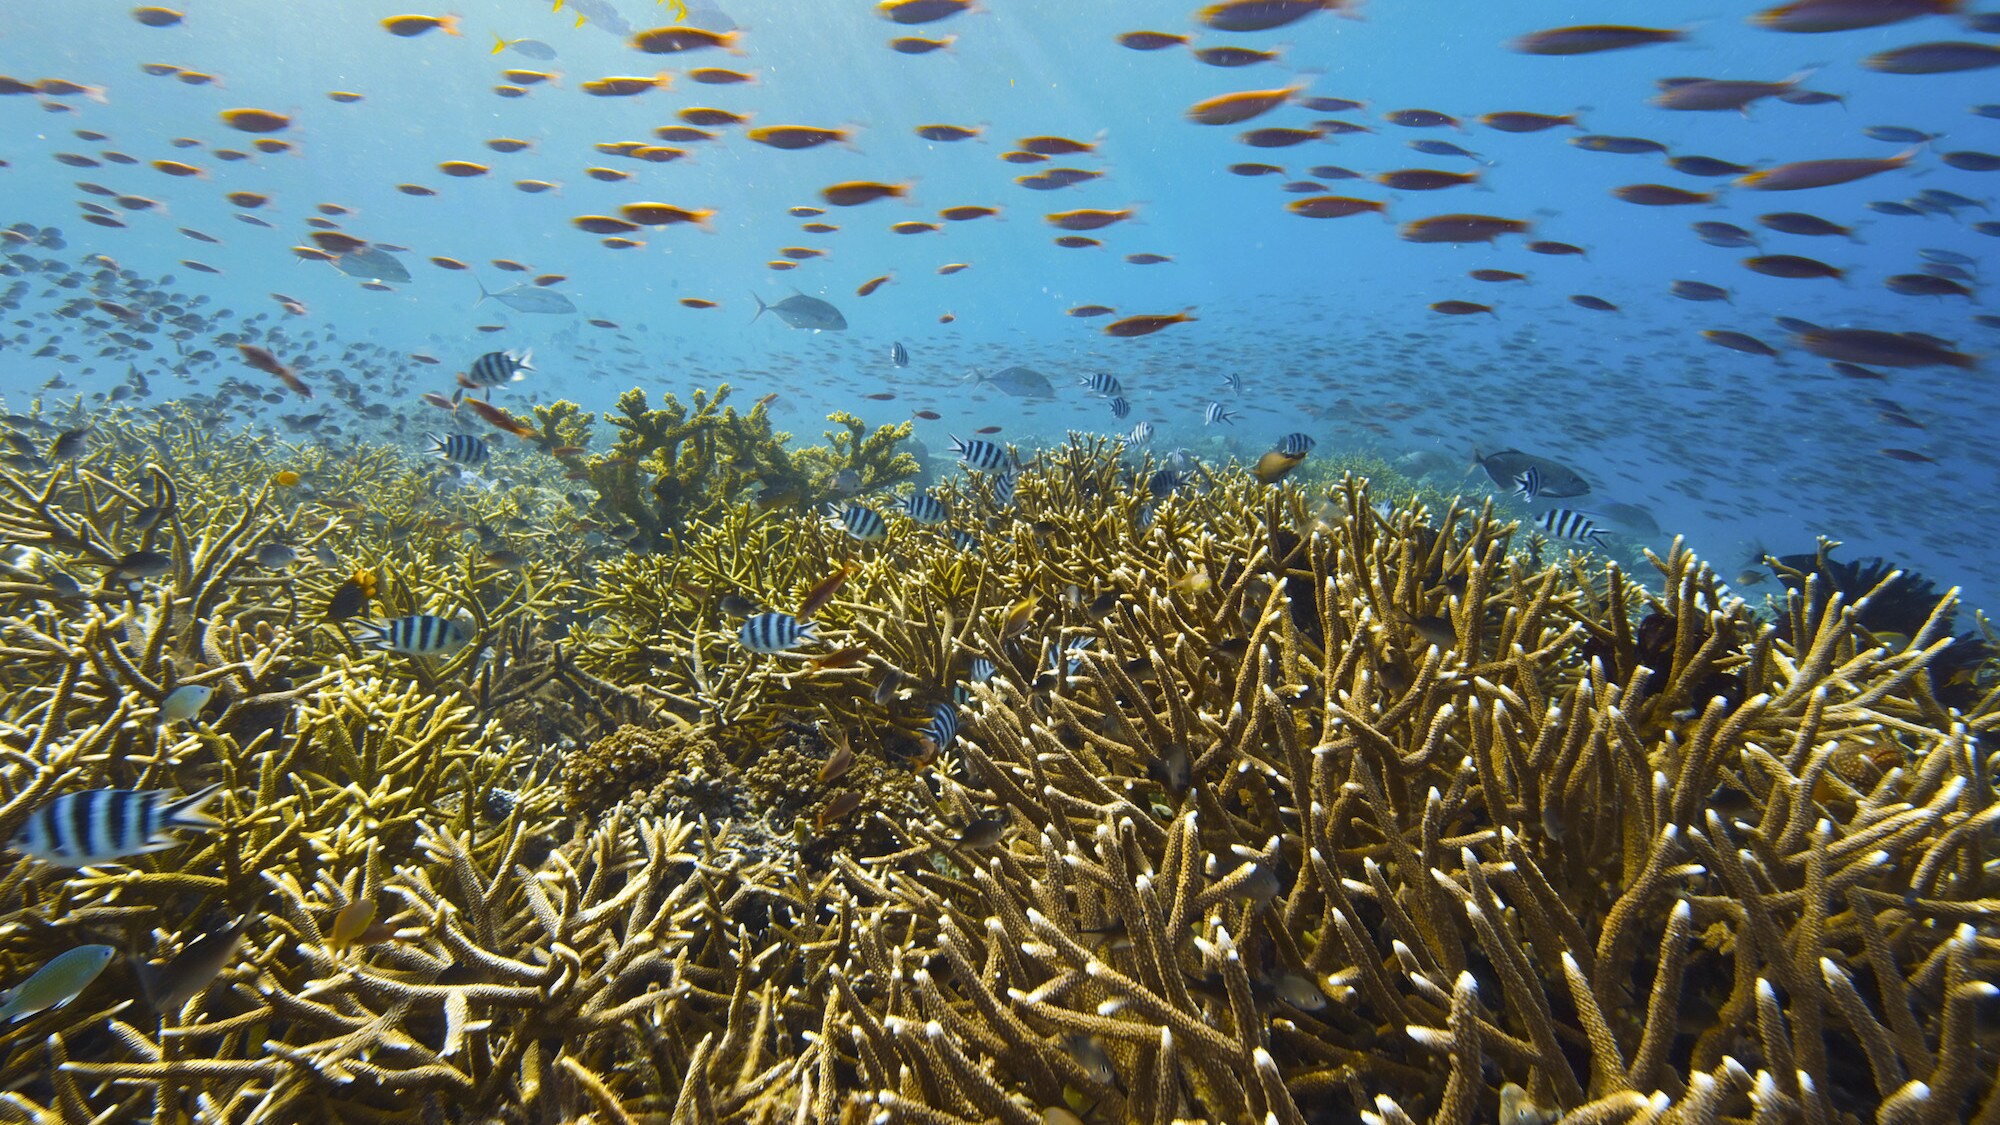 Shoals of fish swimming over coral. (National Geographic for Disney+/Bertie Gregory)